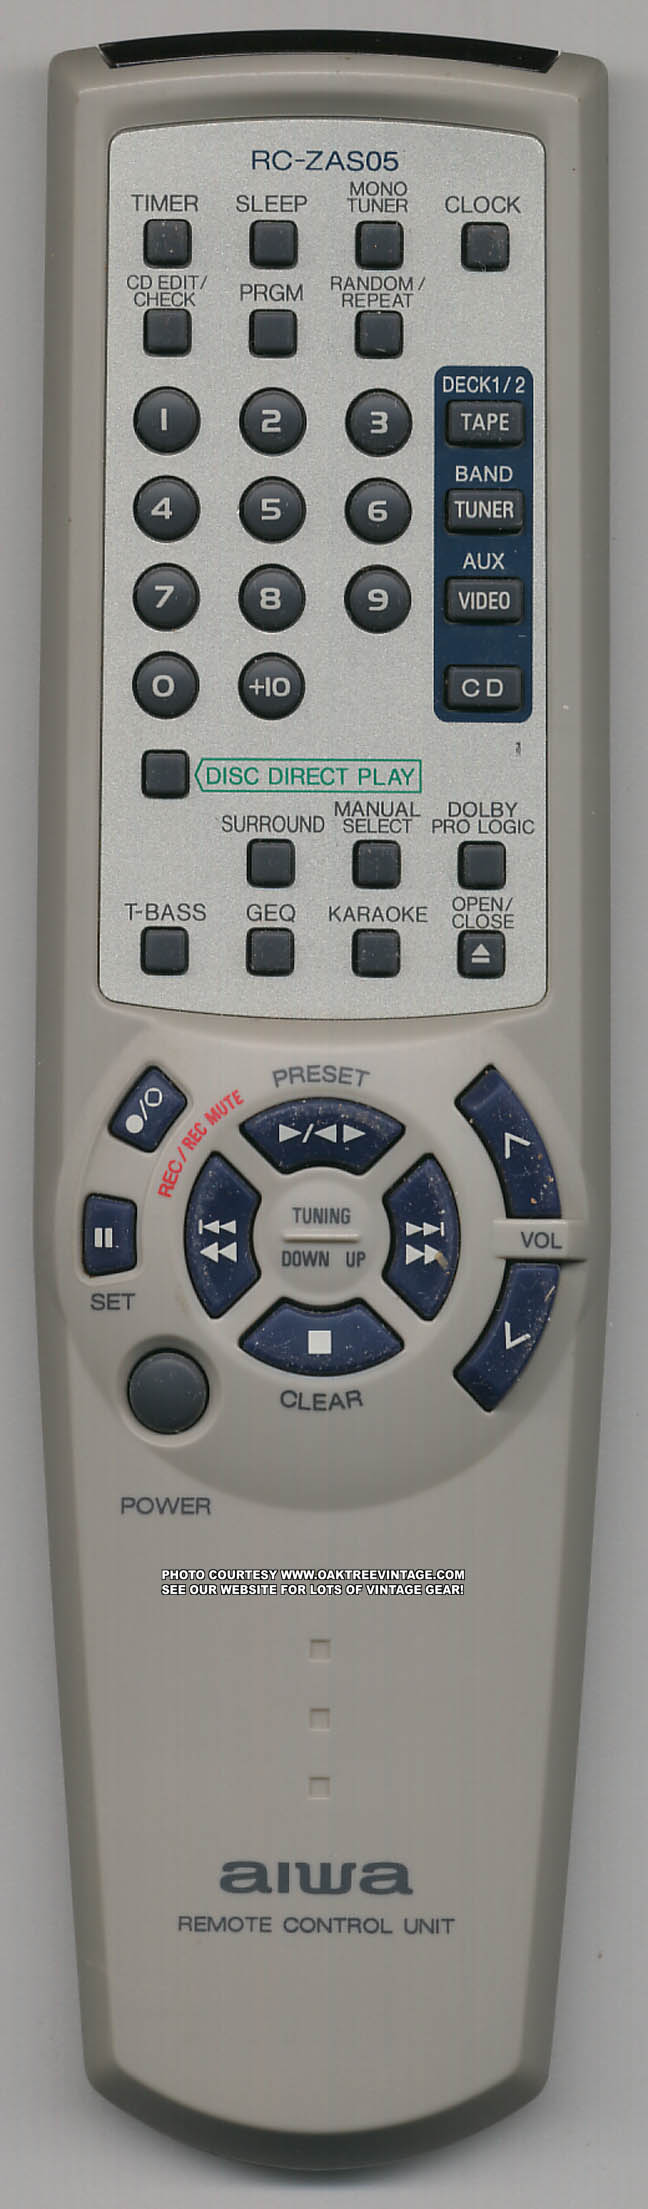 Aiwa GE-NDPH2100, RC-ZAS05, RC-ZAS10 replacement remote control different look